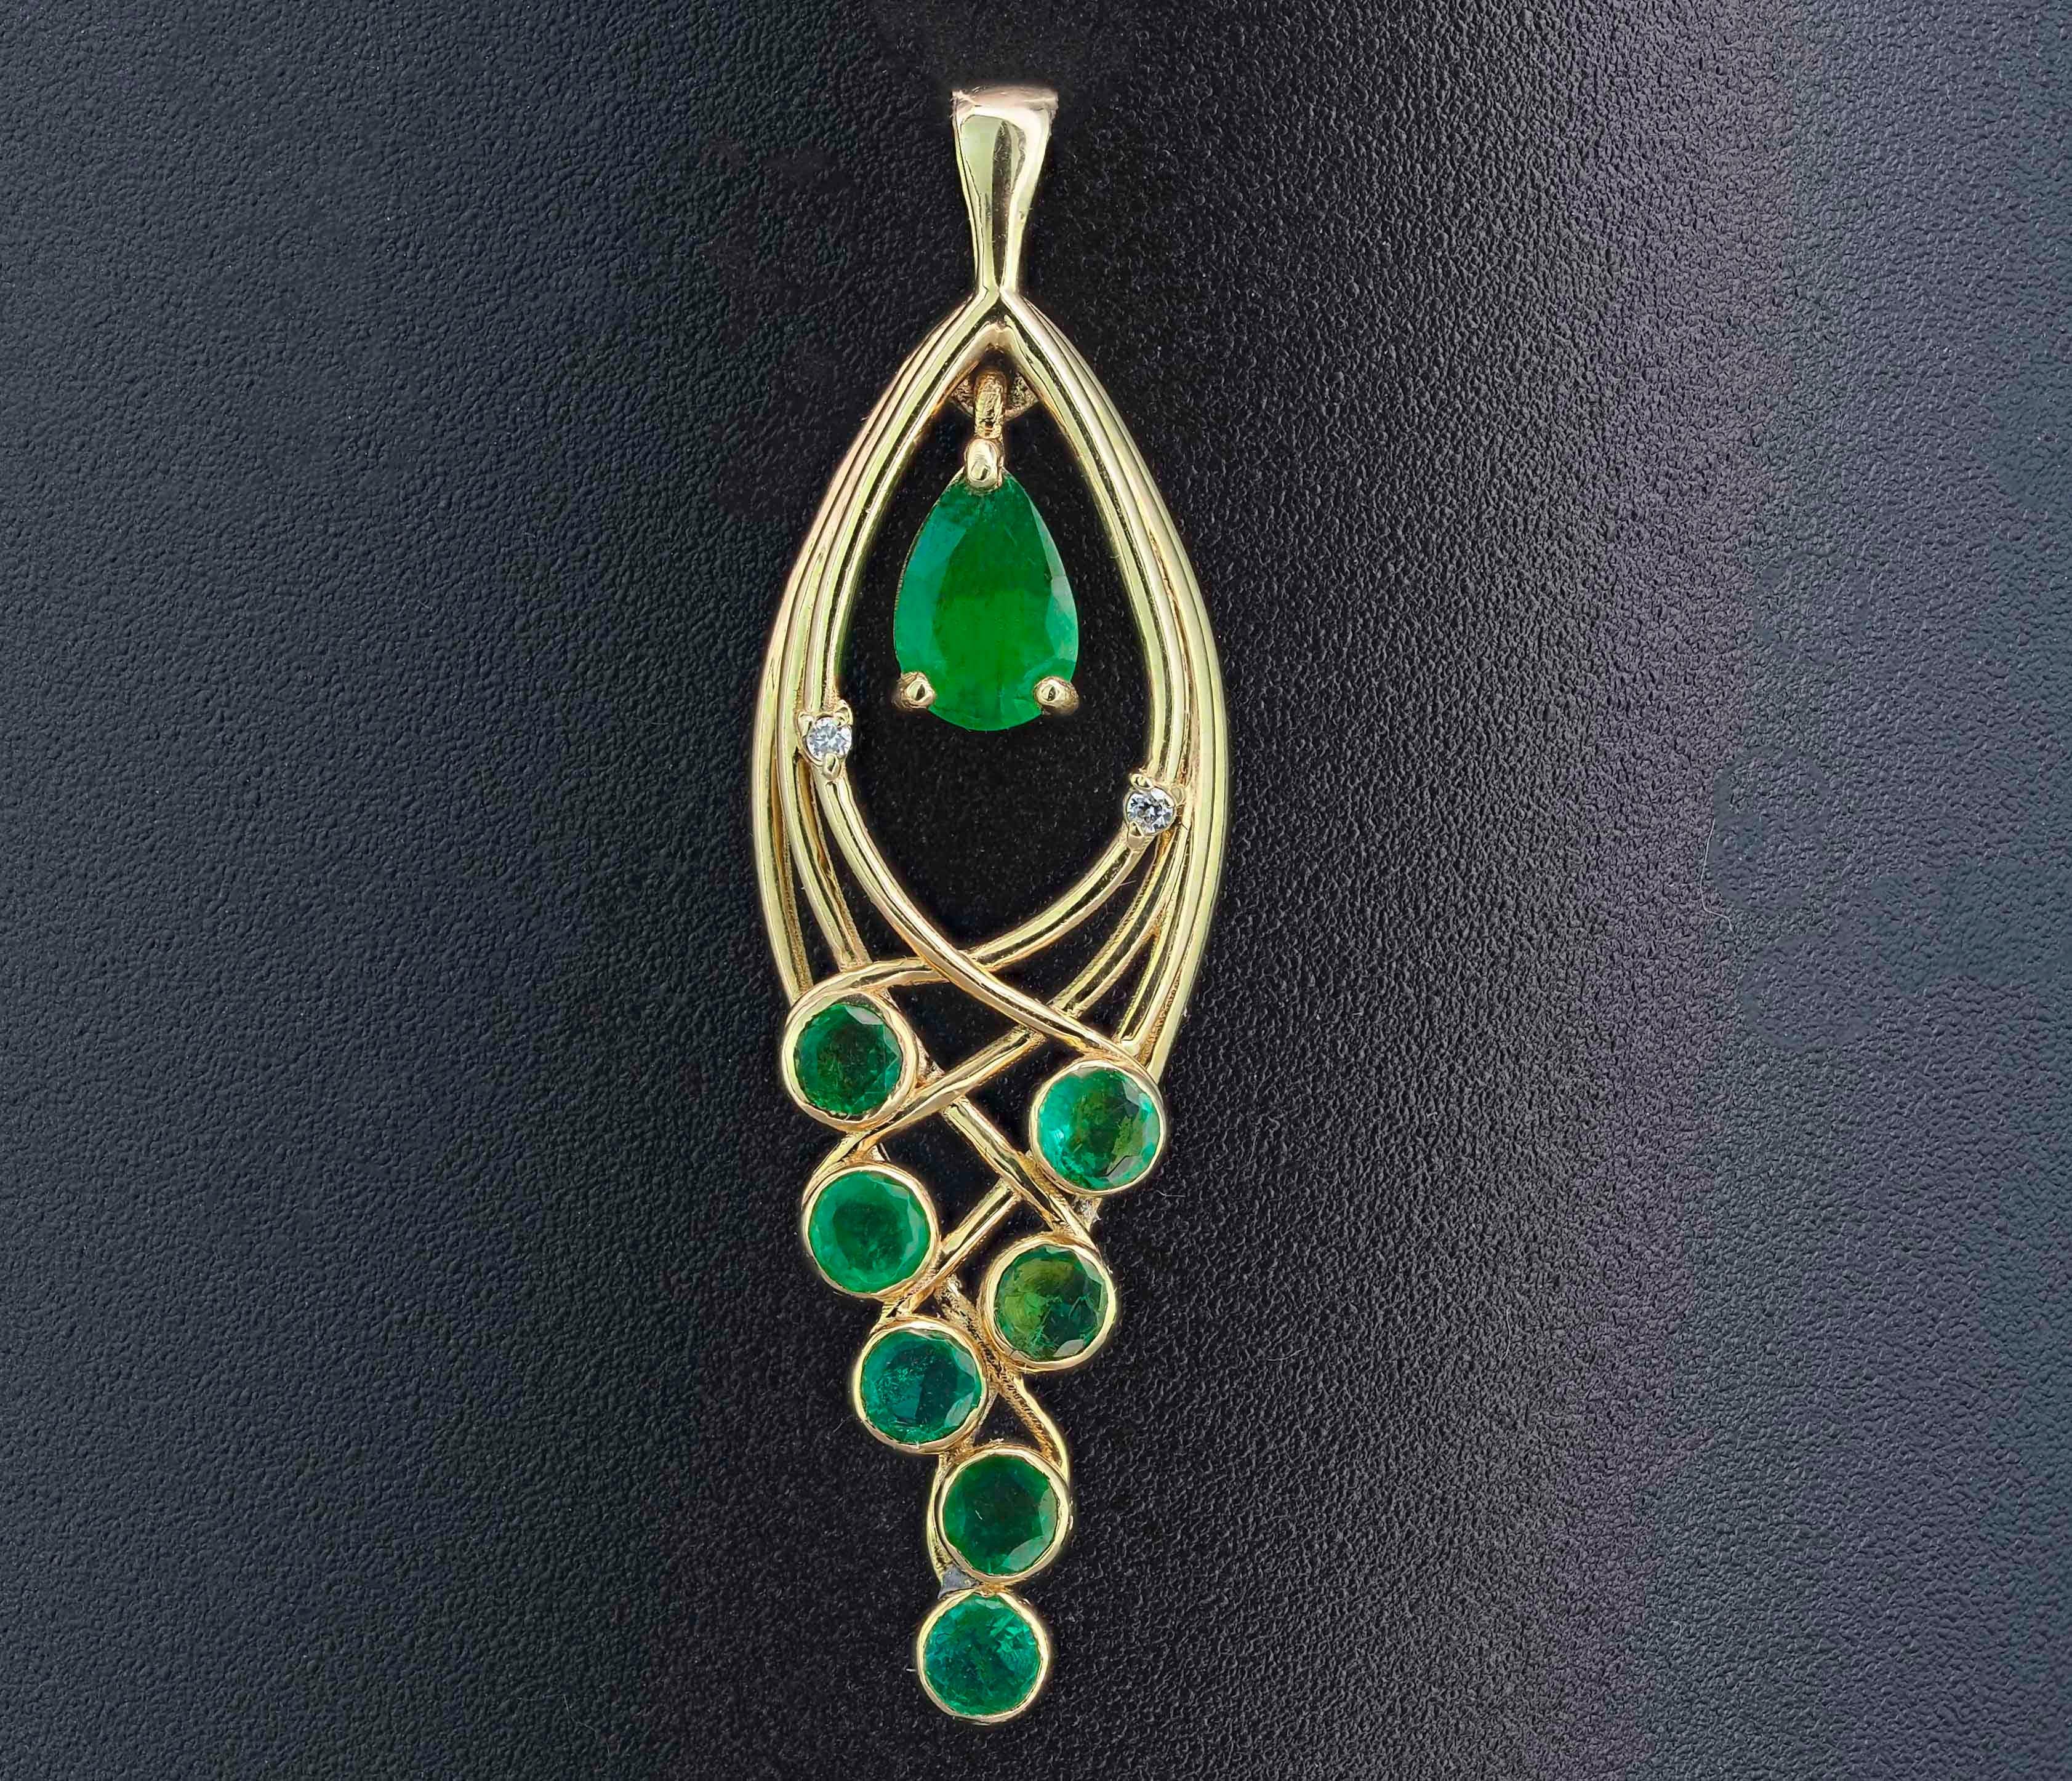 14k Gold Pendant with Emerald, Emeralds and Diamonds, Leaf Pendant For Sale 2